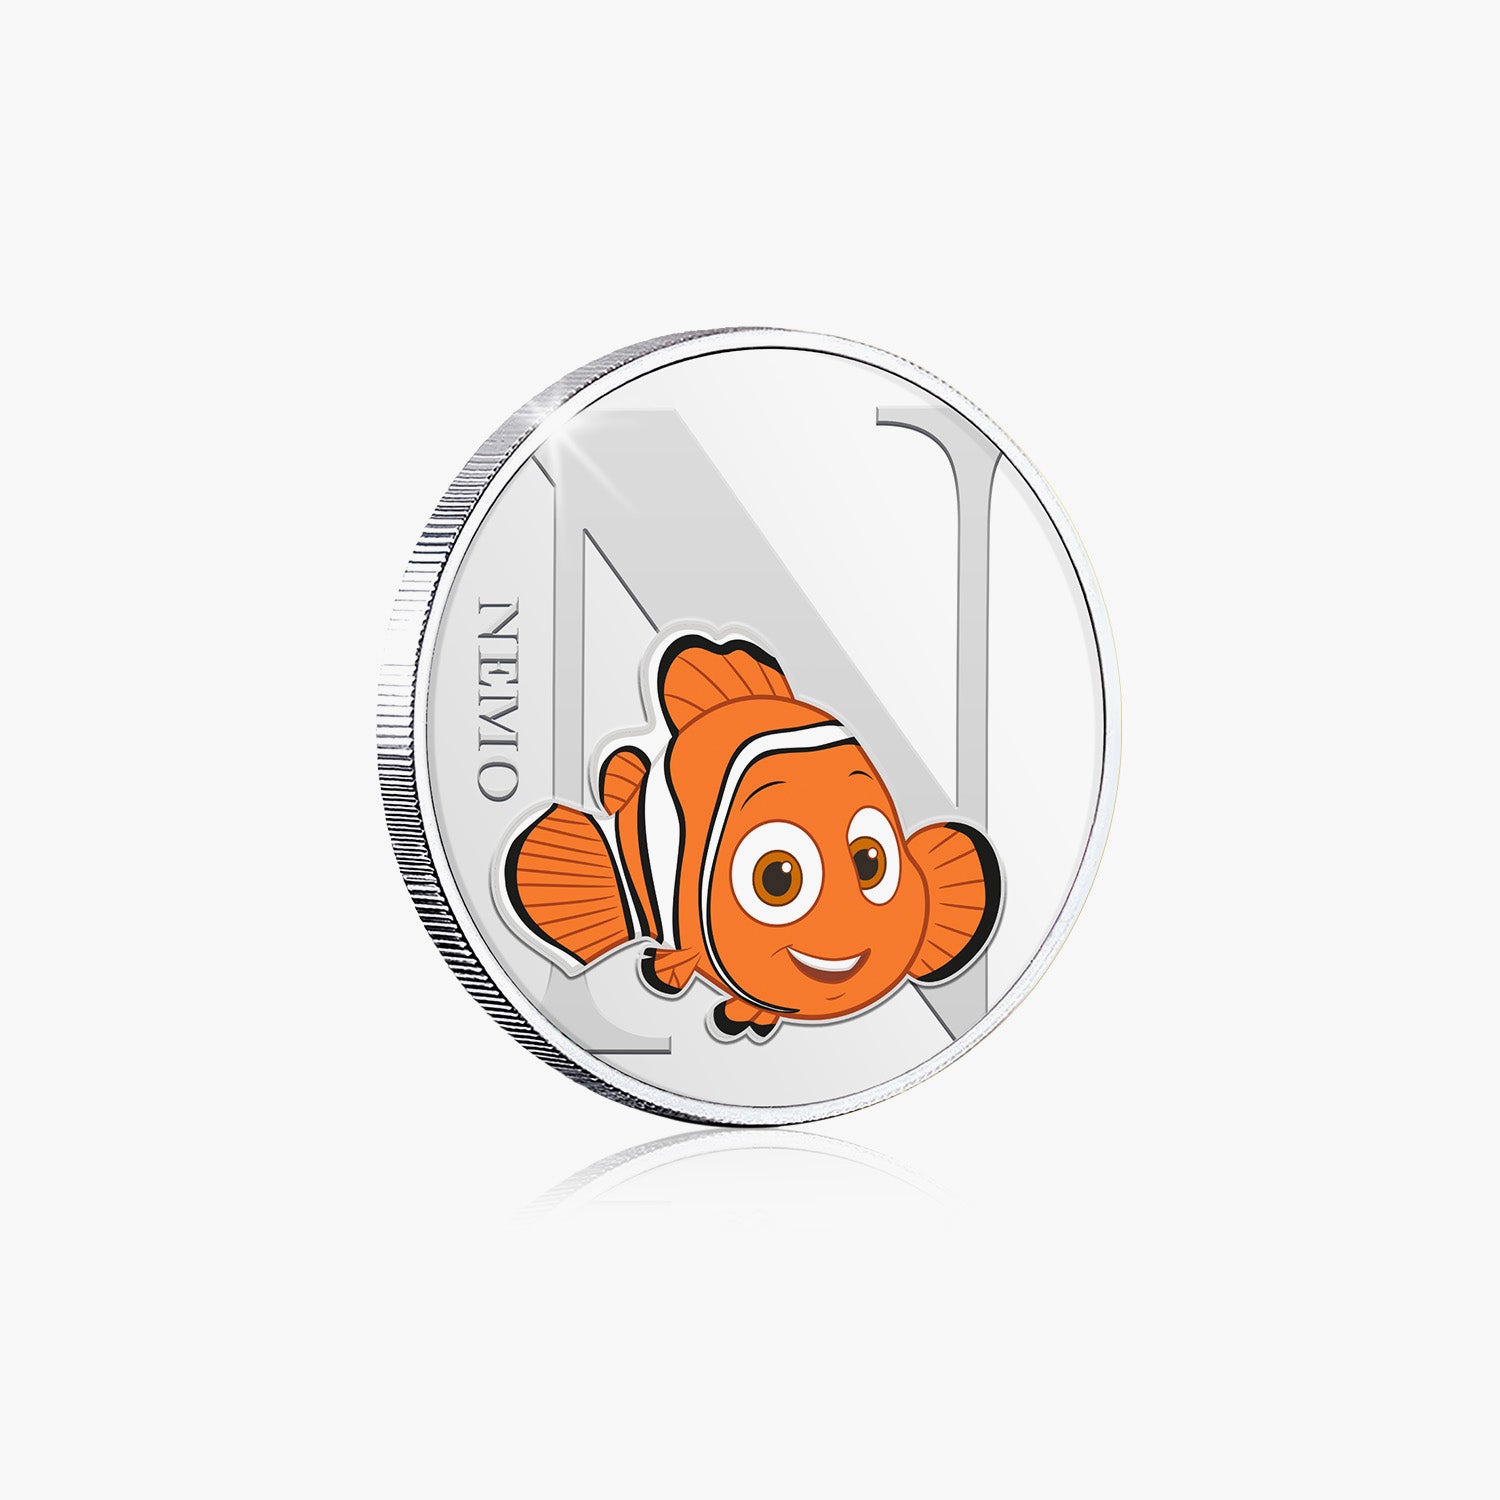 N is for Nemo Silver-Plated Full Colour Commemorative